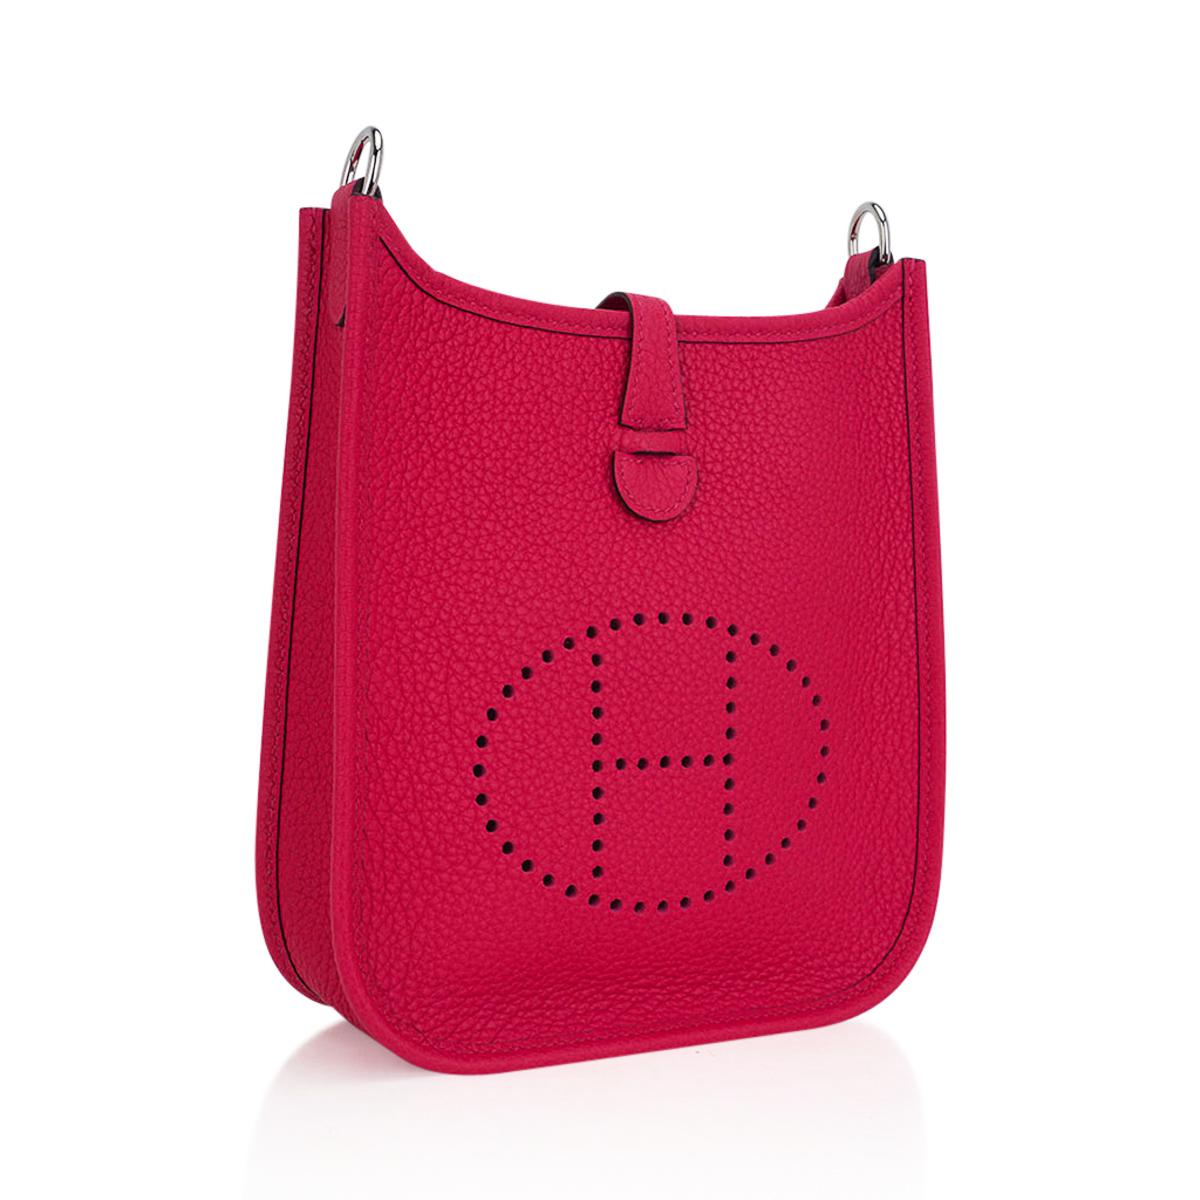 Mightychic offers an Hermes Evelyne TPM featured in saturated Framboise.
Clemence leather is soft and scratch resistant.
Signature perforated H on front of bag.
Fresh with Palladium hardware.
Fabulous shoulder or crossbody bag.
Comes with sleepers